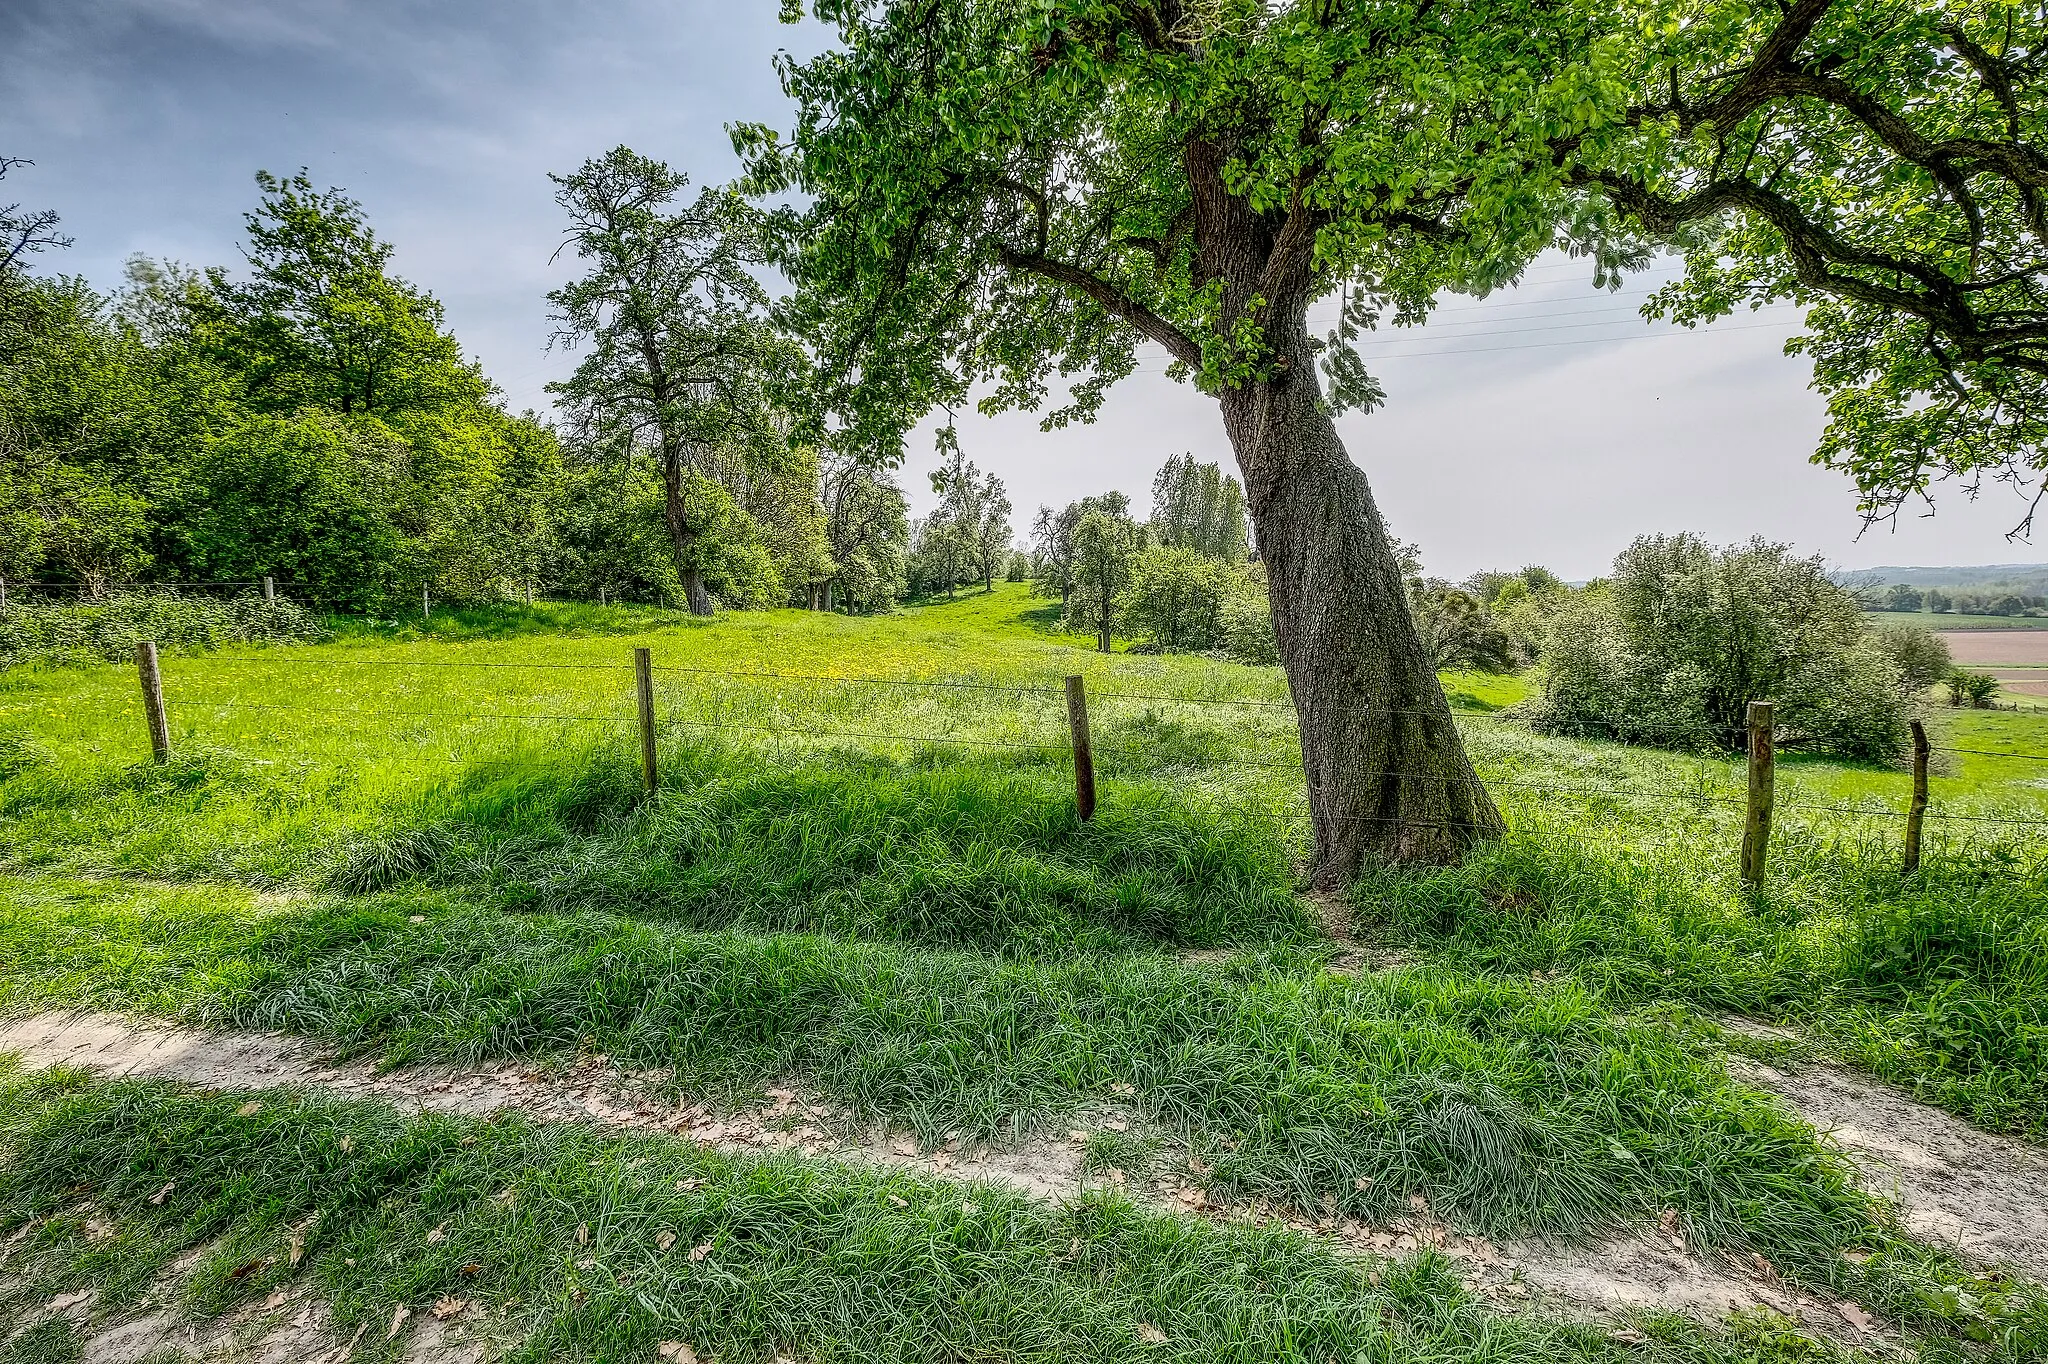 Photo showing: A old twisted pear tree in the Hesbanian landscape. In this meadow all pear trees are twisted more or less like this one. Always asked why on this location or is it a special kind of pear or ....